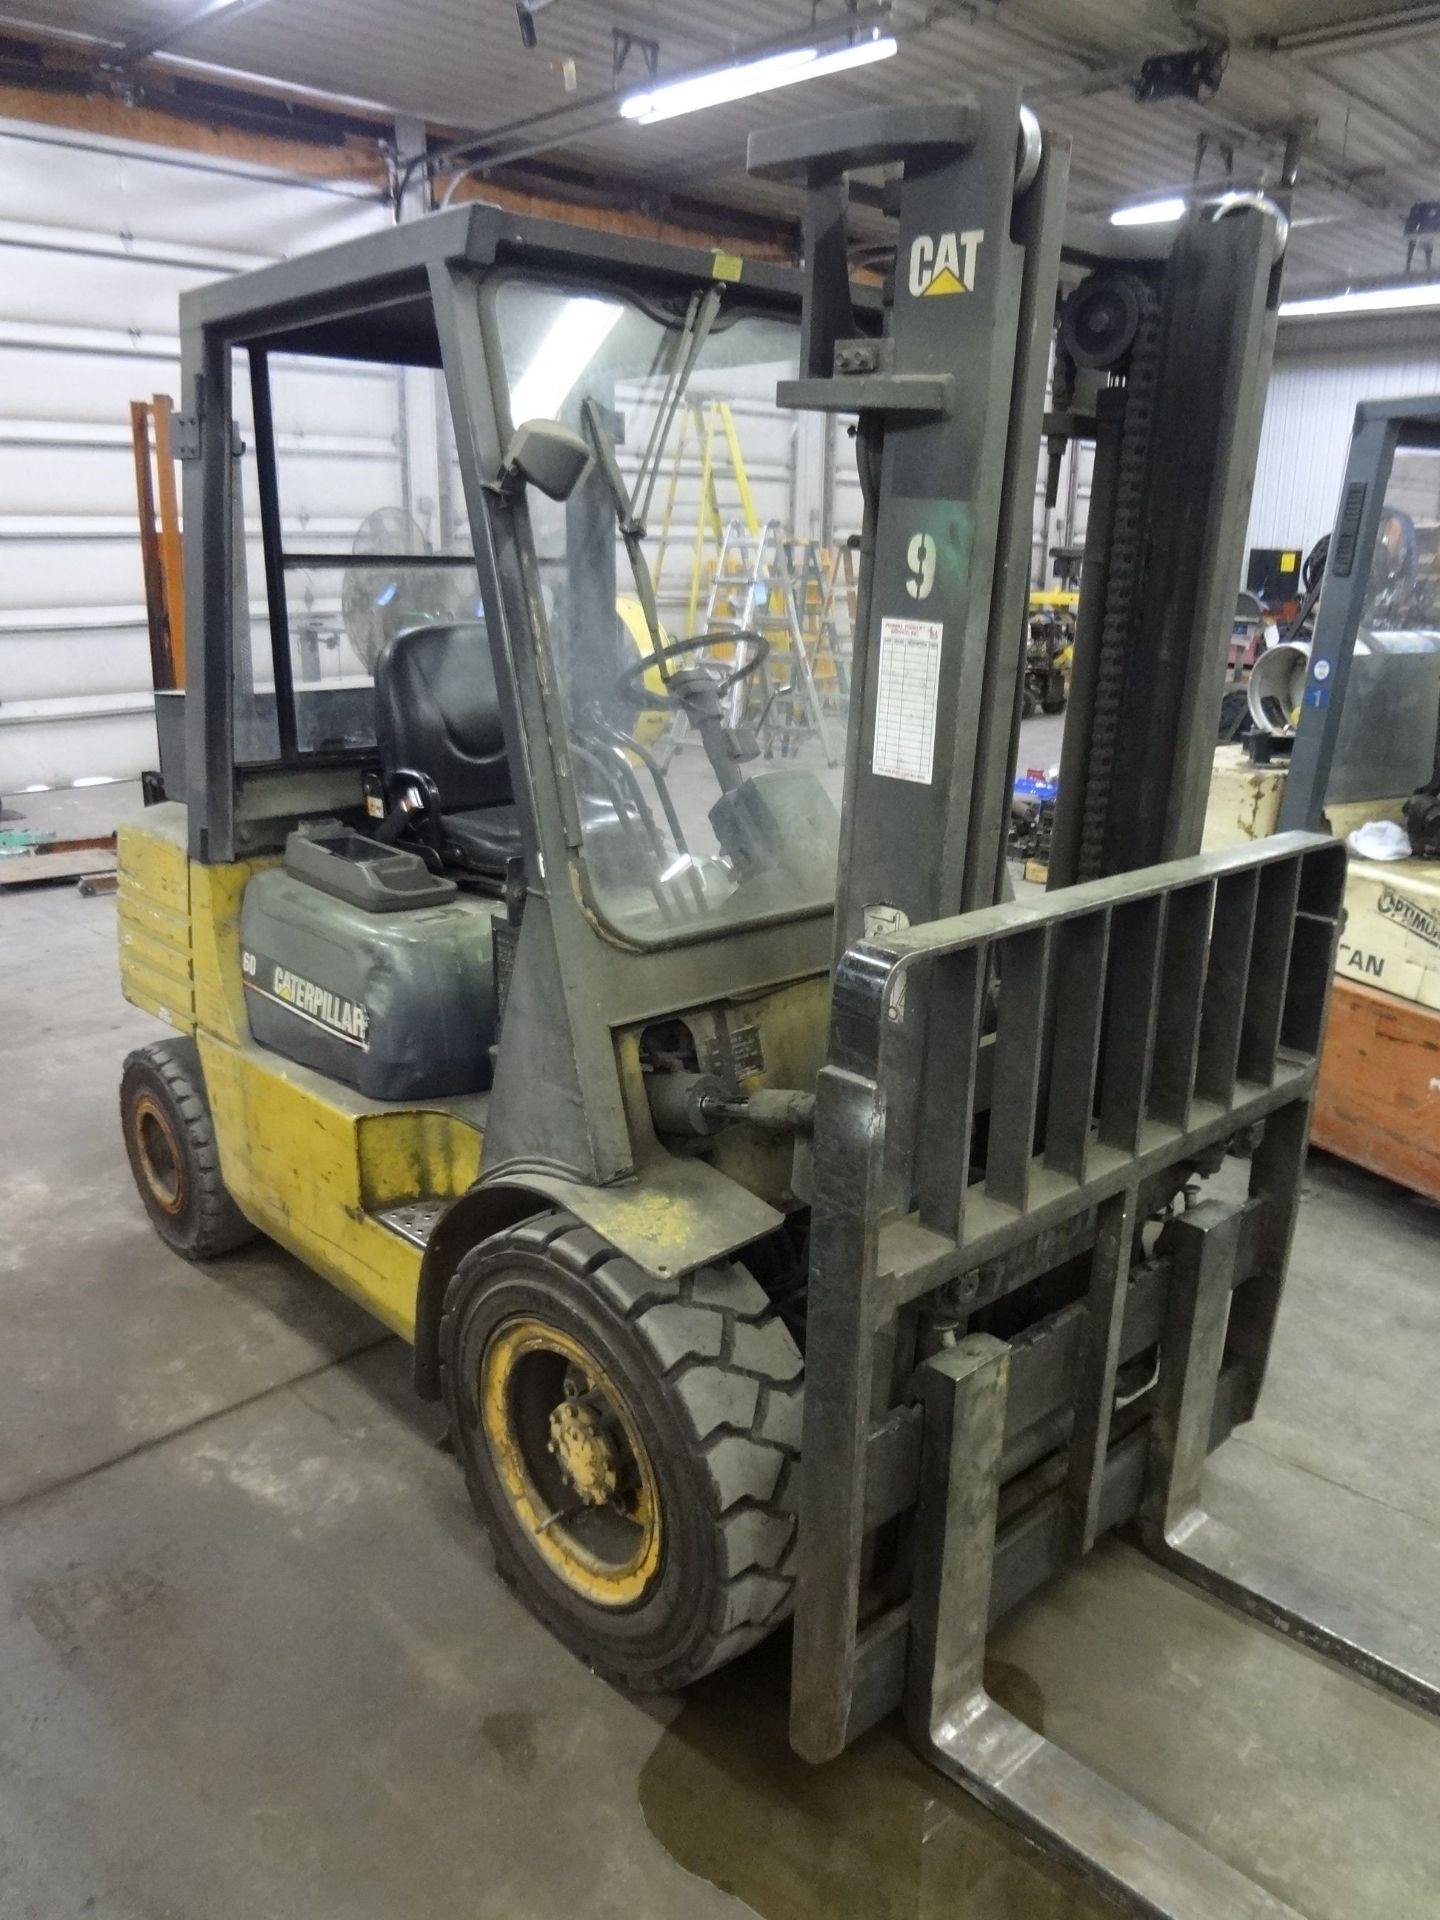 6,000 LB. CATERPILLAR MODEL DP-30 PNEUMATIC TIRE, DIESEL POWERED LIFT TRUCK; S/N 7KM3577, 2-STAGE - Image 2 of 7